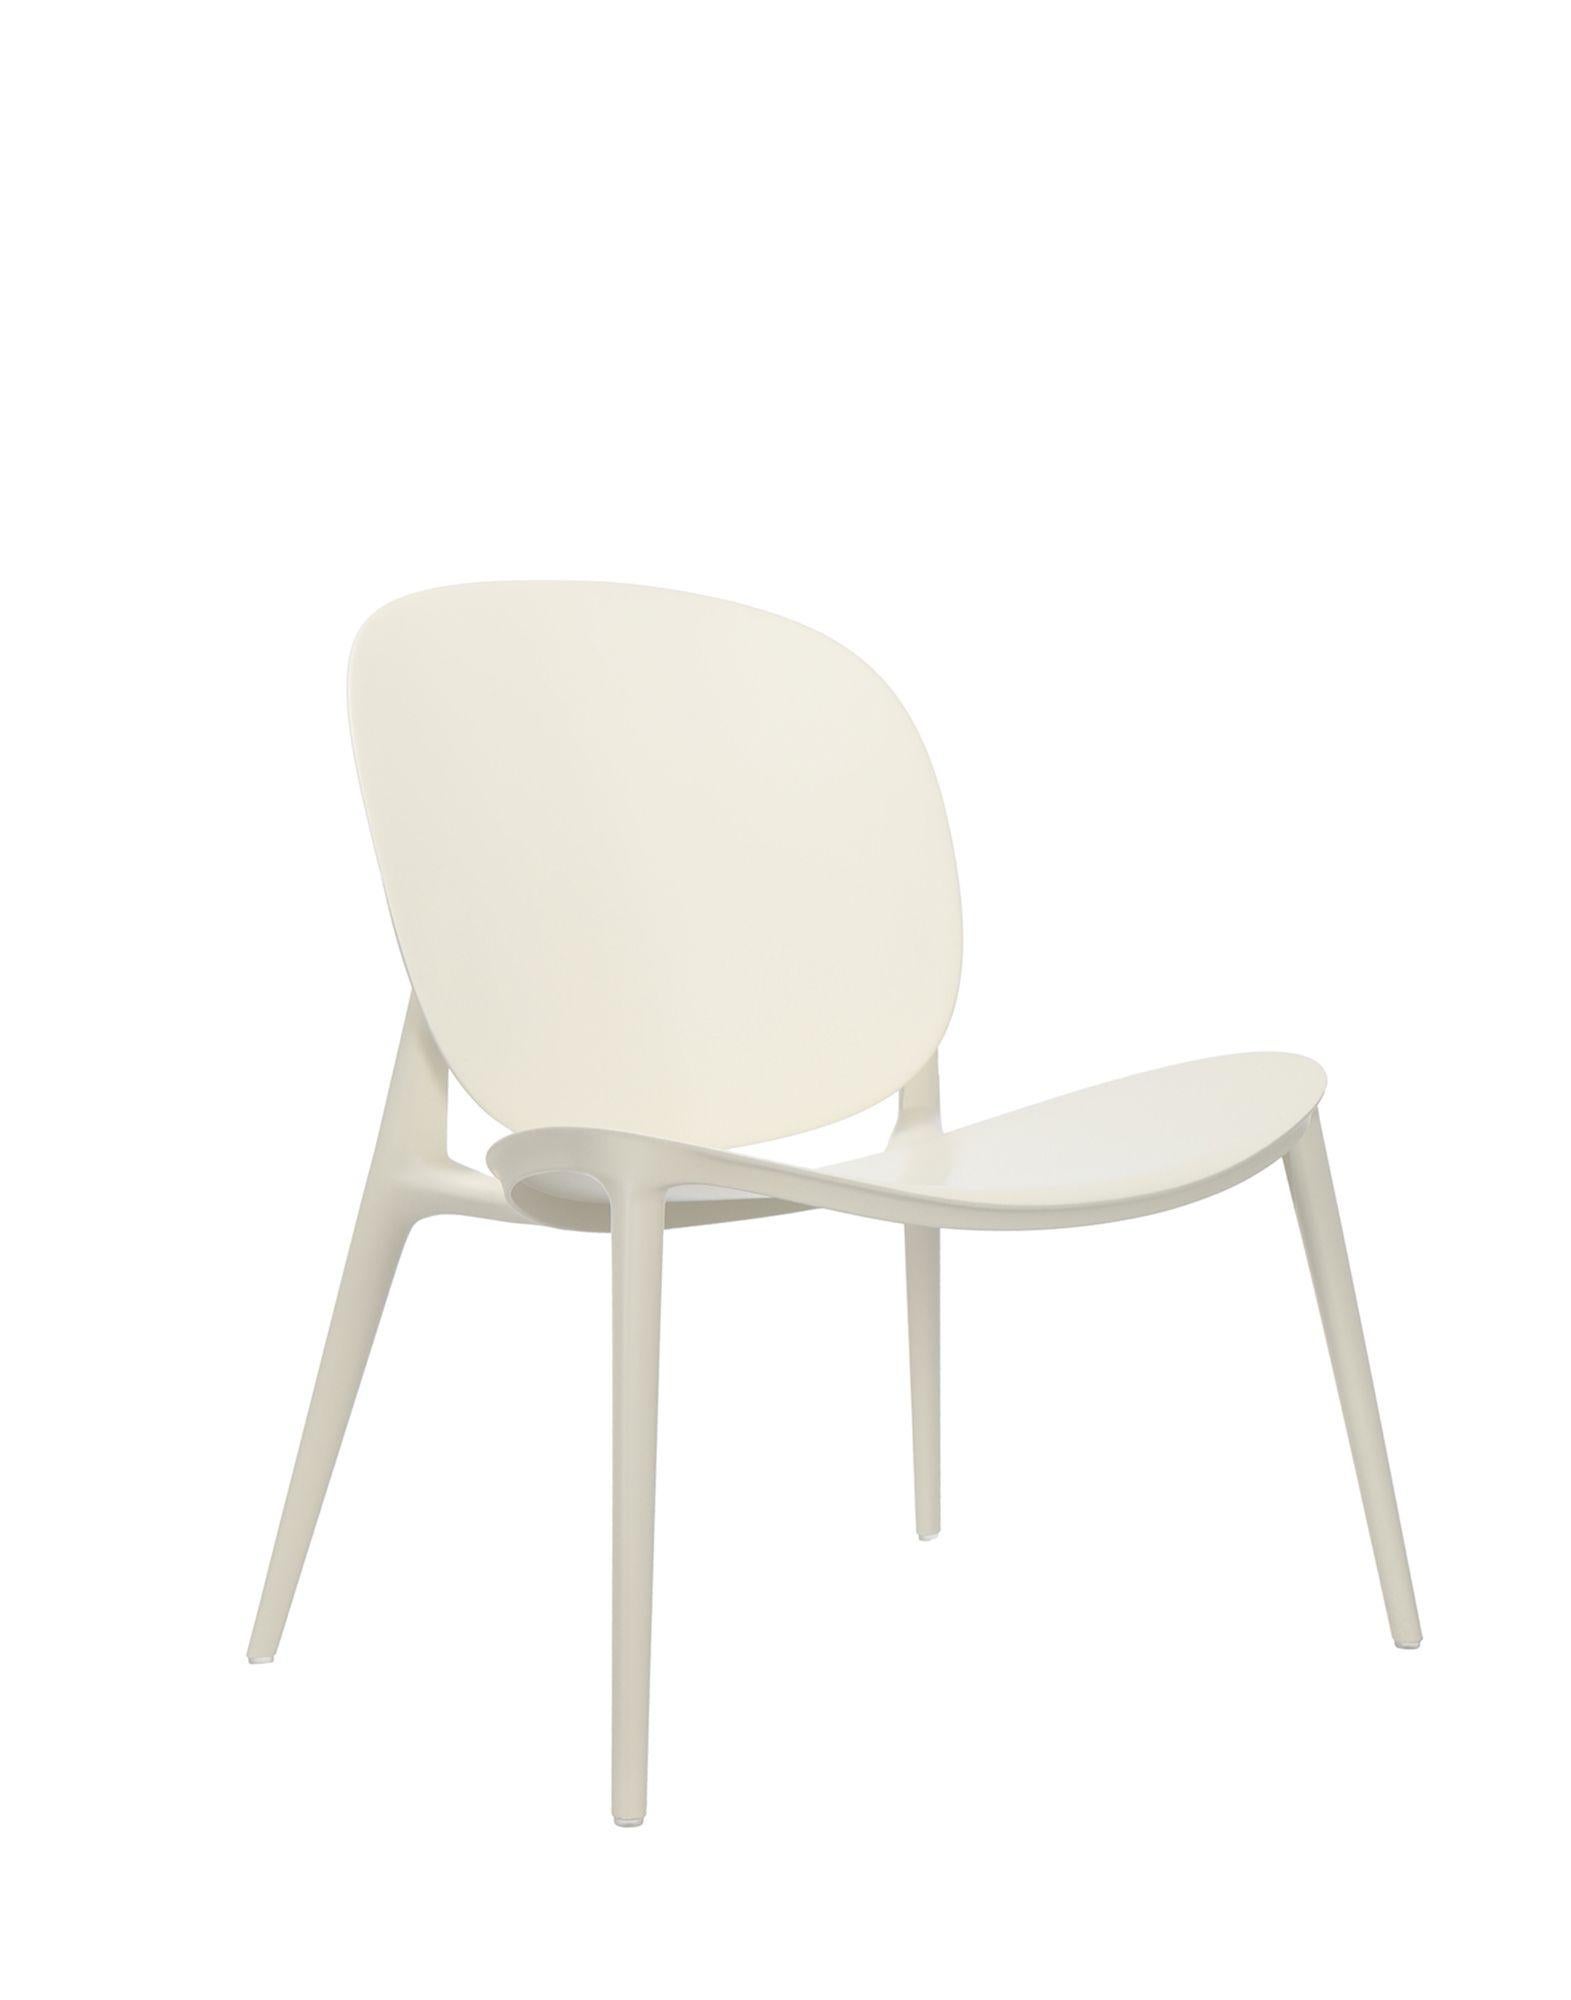 Italian Kartell Be Bop in White by Ludovica + Roberta Palomba For Sale